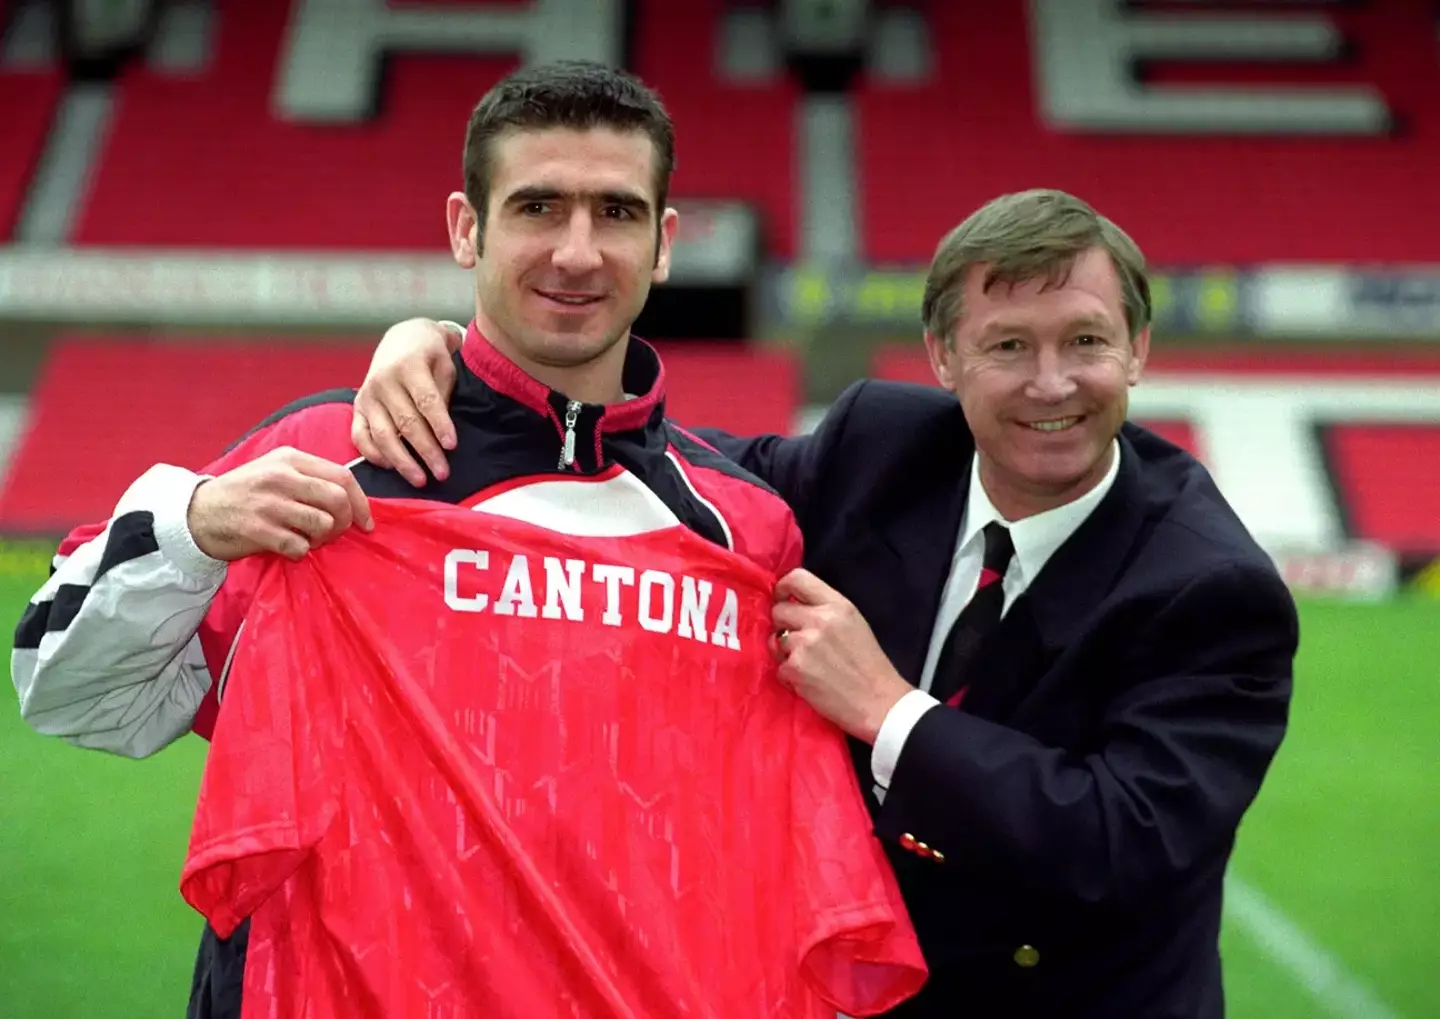 Signing Cantona was the catalyst for United's huge success under Ferguson. Image: Alamy